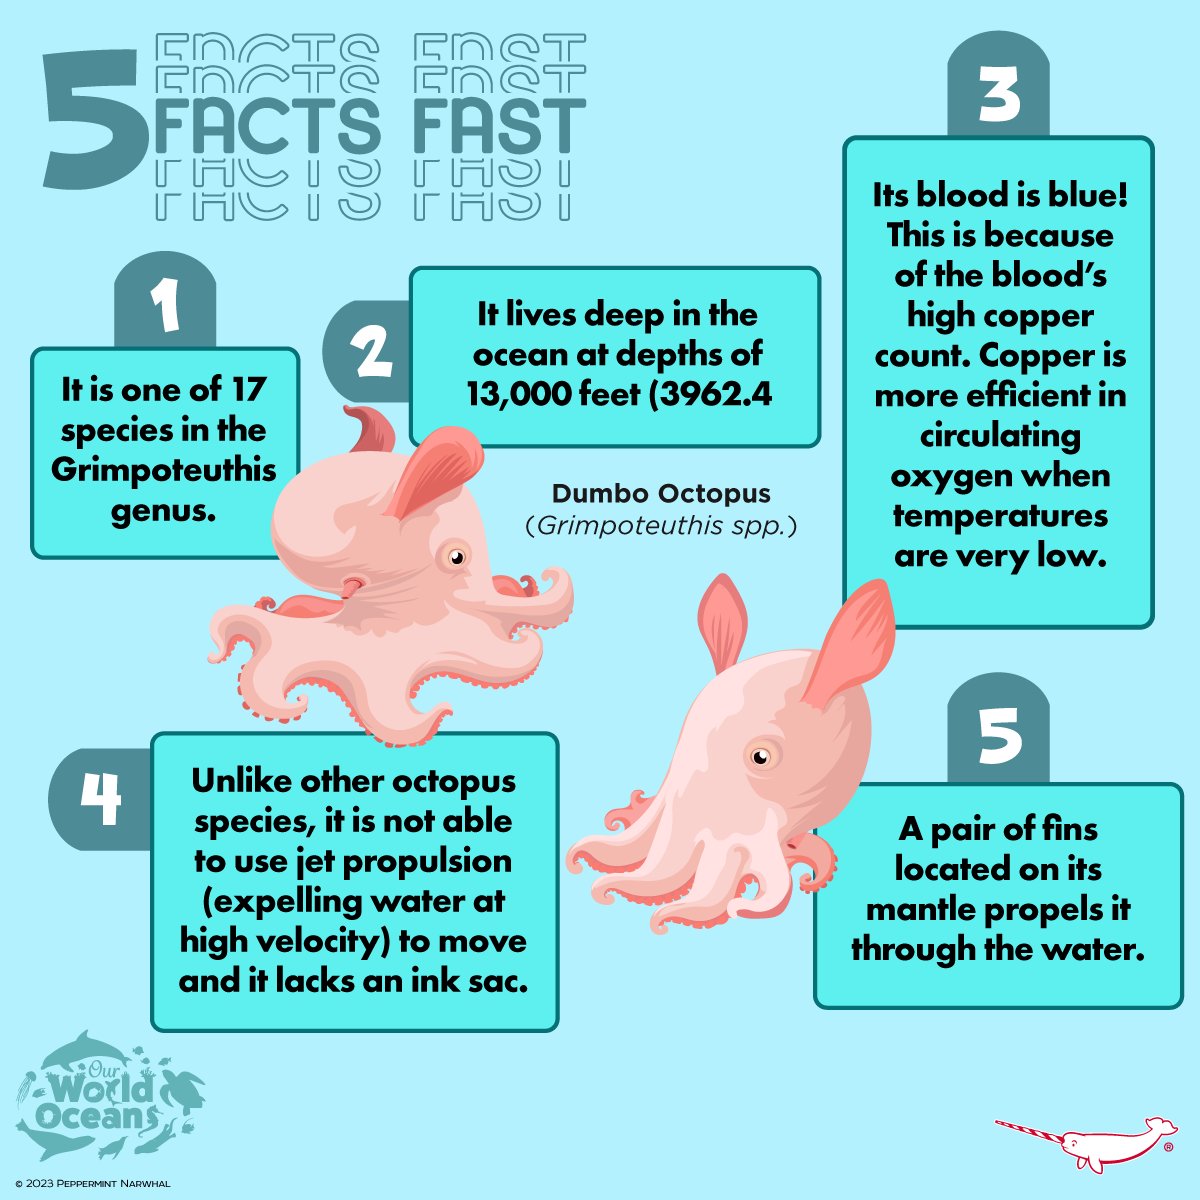 #5FactsFast #DumboOctopus
#CephalopodWeek #OurWorldOceansMonth

Shop #PeppermintNarwhal:
peppermintnarwhal.com

#Cephalopod  #OurWorldOceans #OceanMonth #Ocean